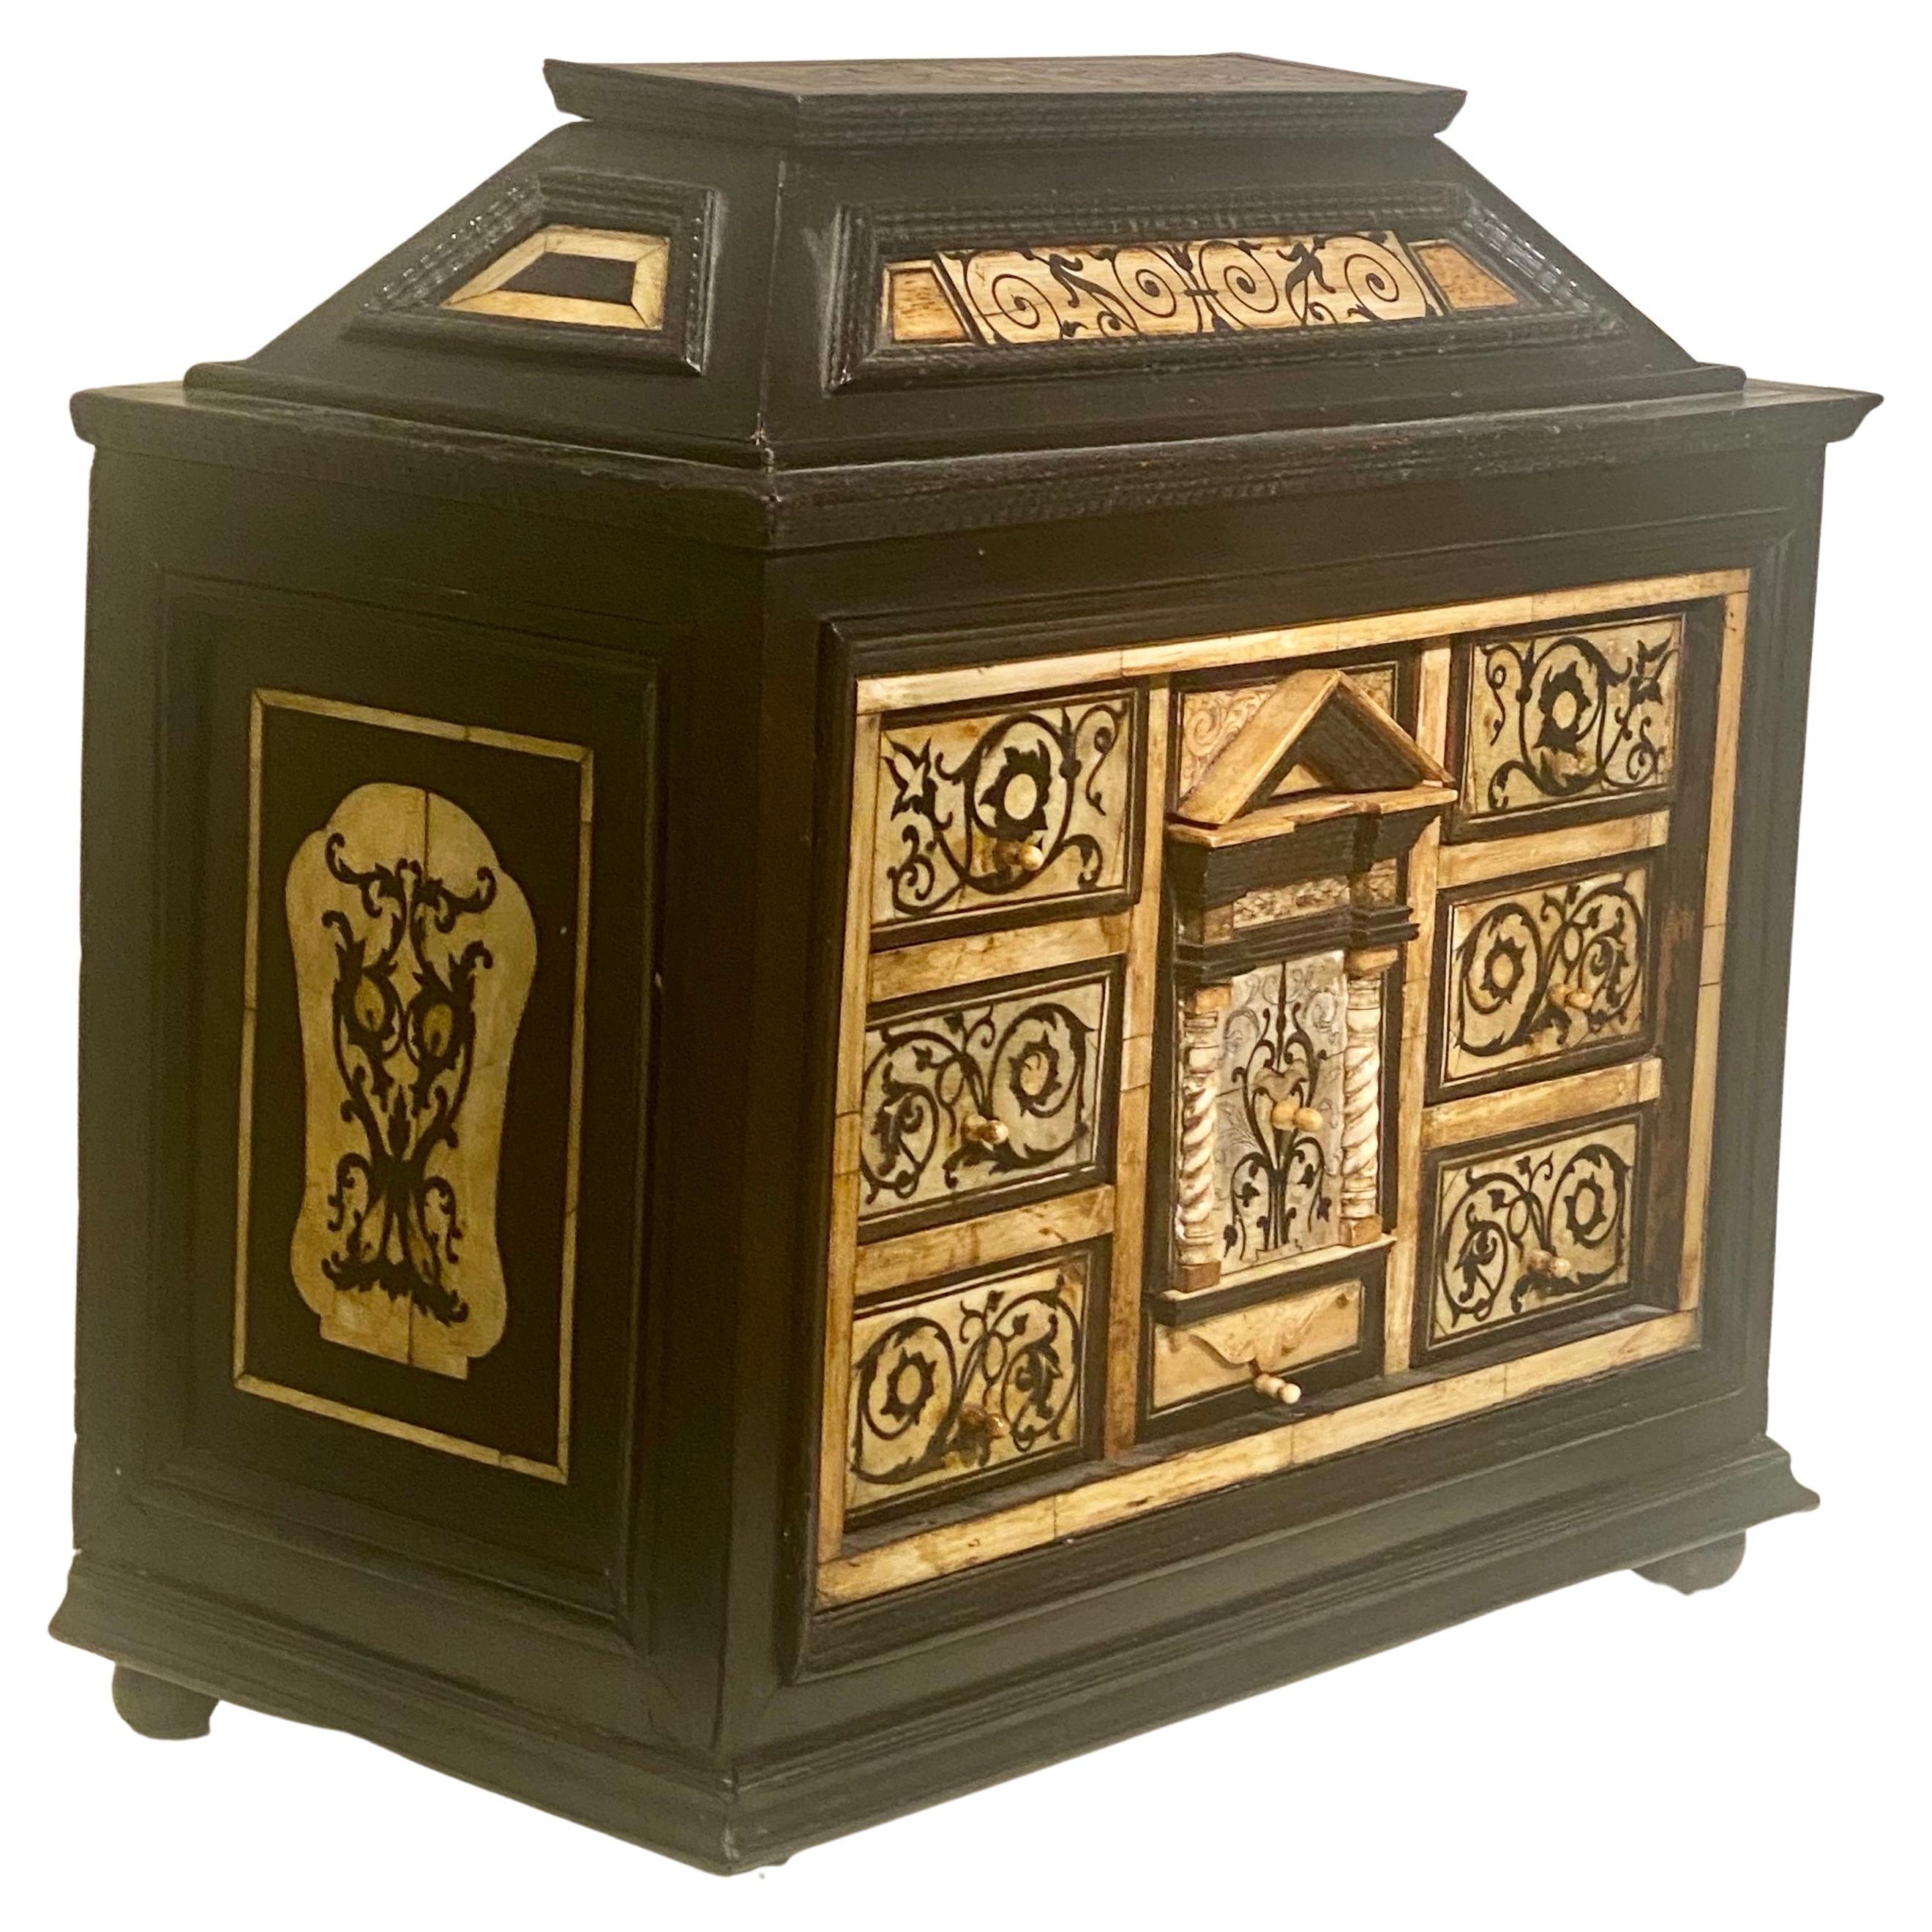 This precious table cabinet opens with a lid and has nine drawers richly decorated with ivory and ebony marquetry depicting foliage and scrolls, each drawer has an ivory pull button. The top of the lid has a similar design of ivory foliage on ebony